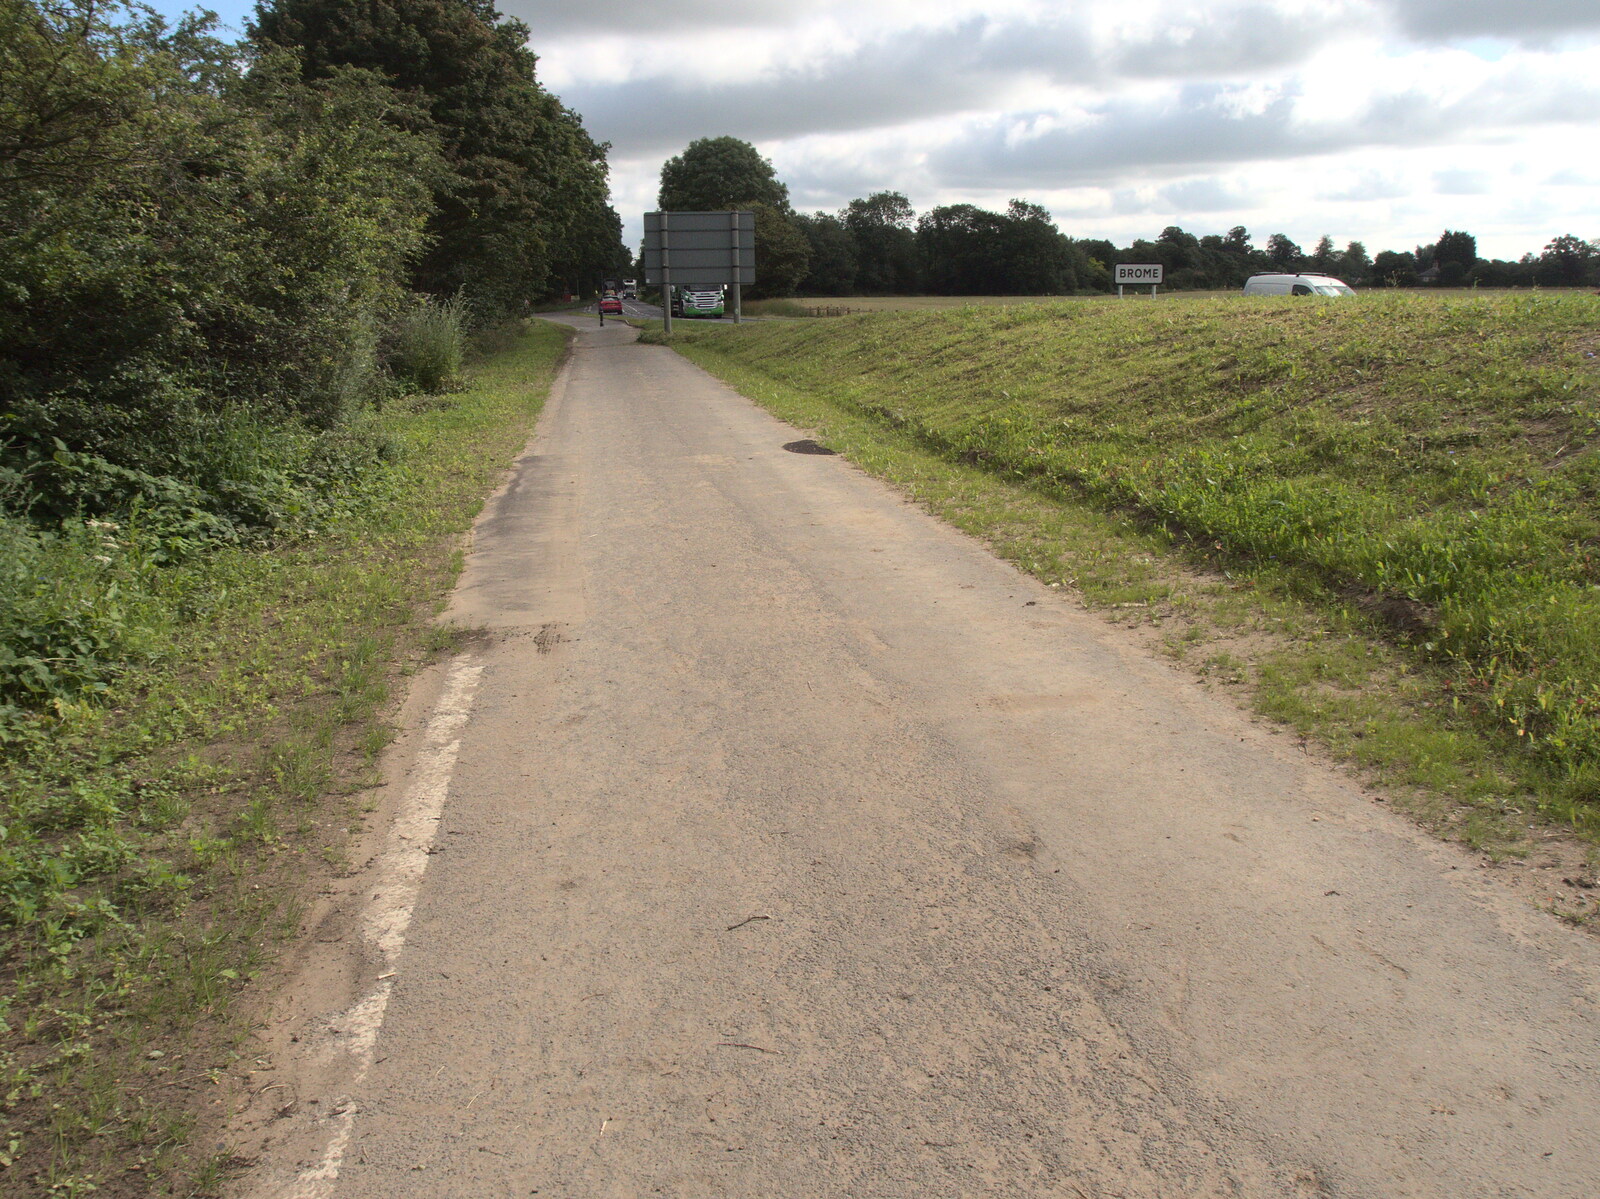 A short stretch of old A140 is now a cycle path from Hares, Tortoises and Station 119, Eye, Suffolk - 19th July 2021